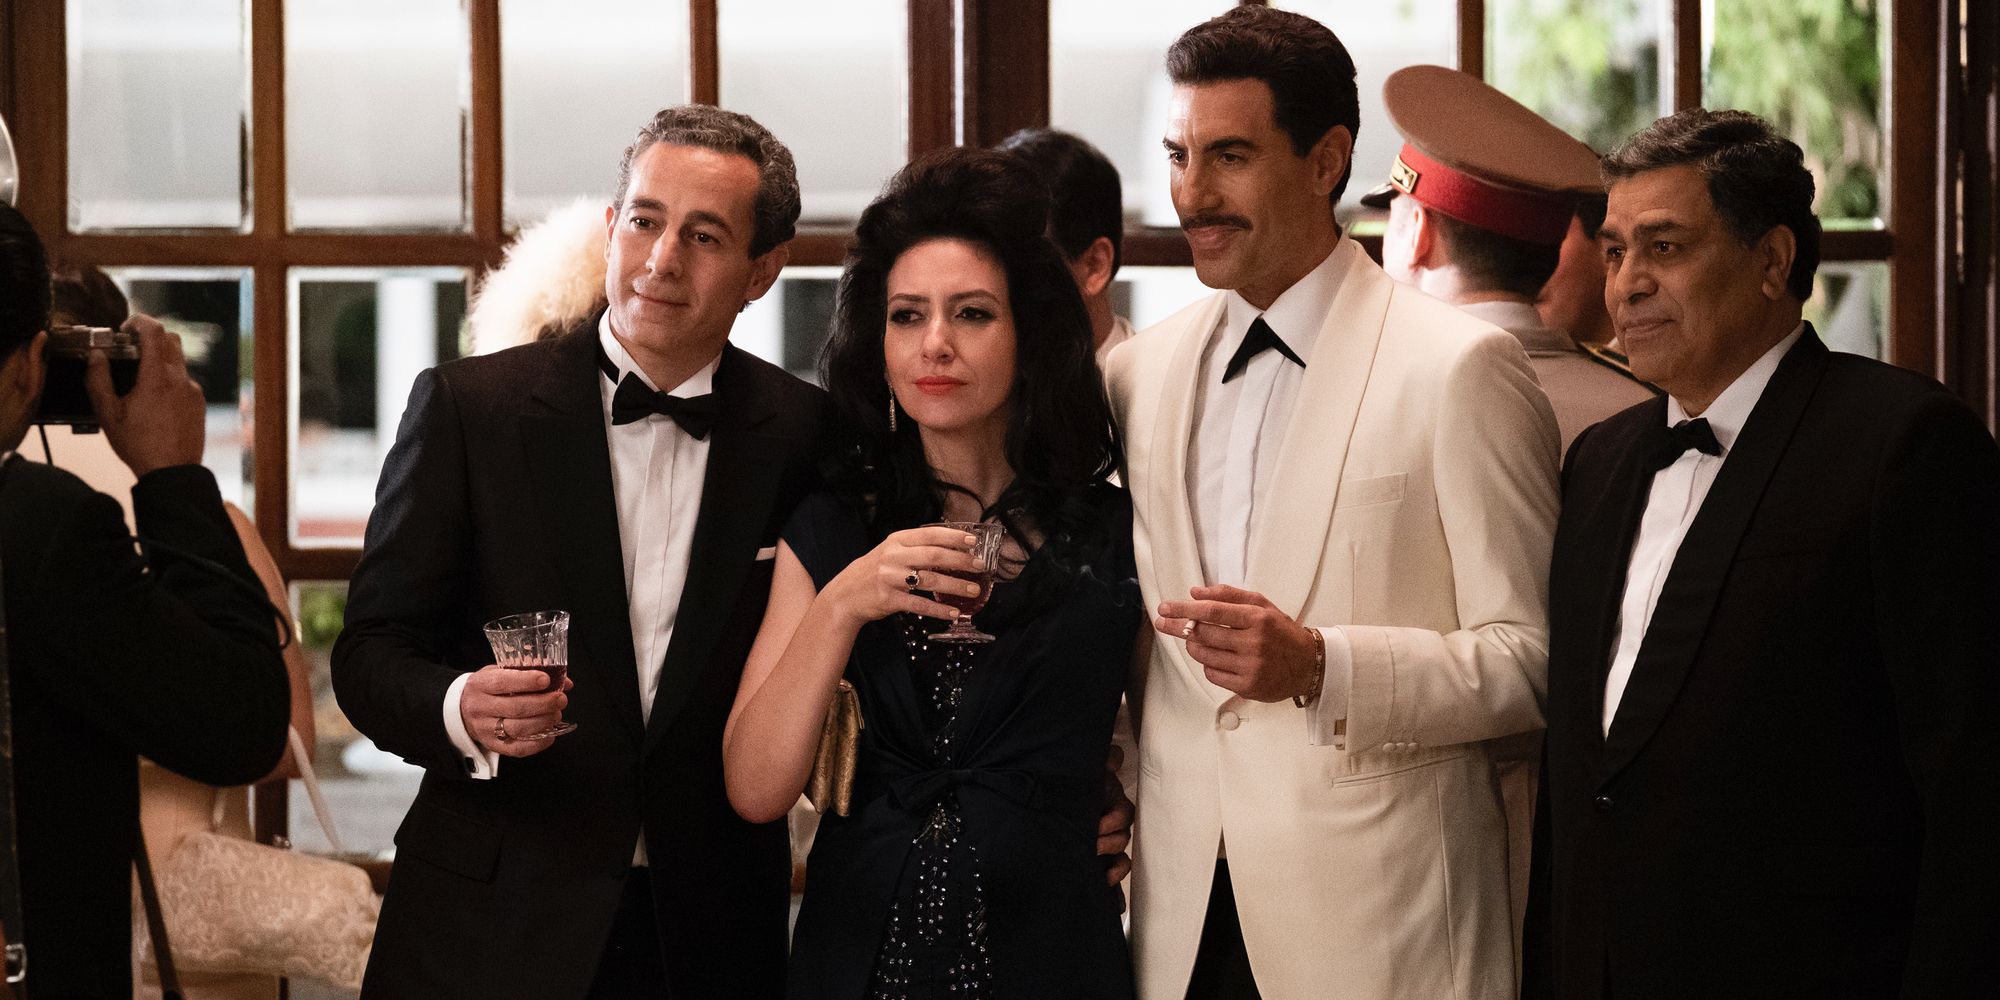 Sacha Baron Cohen as Eli Cohen posing with other characters in The Spy Netflix